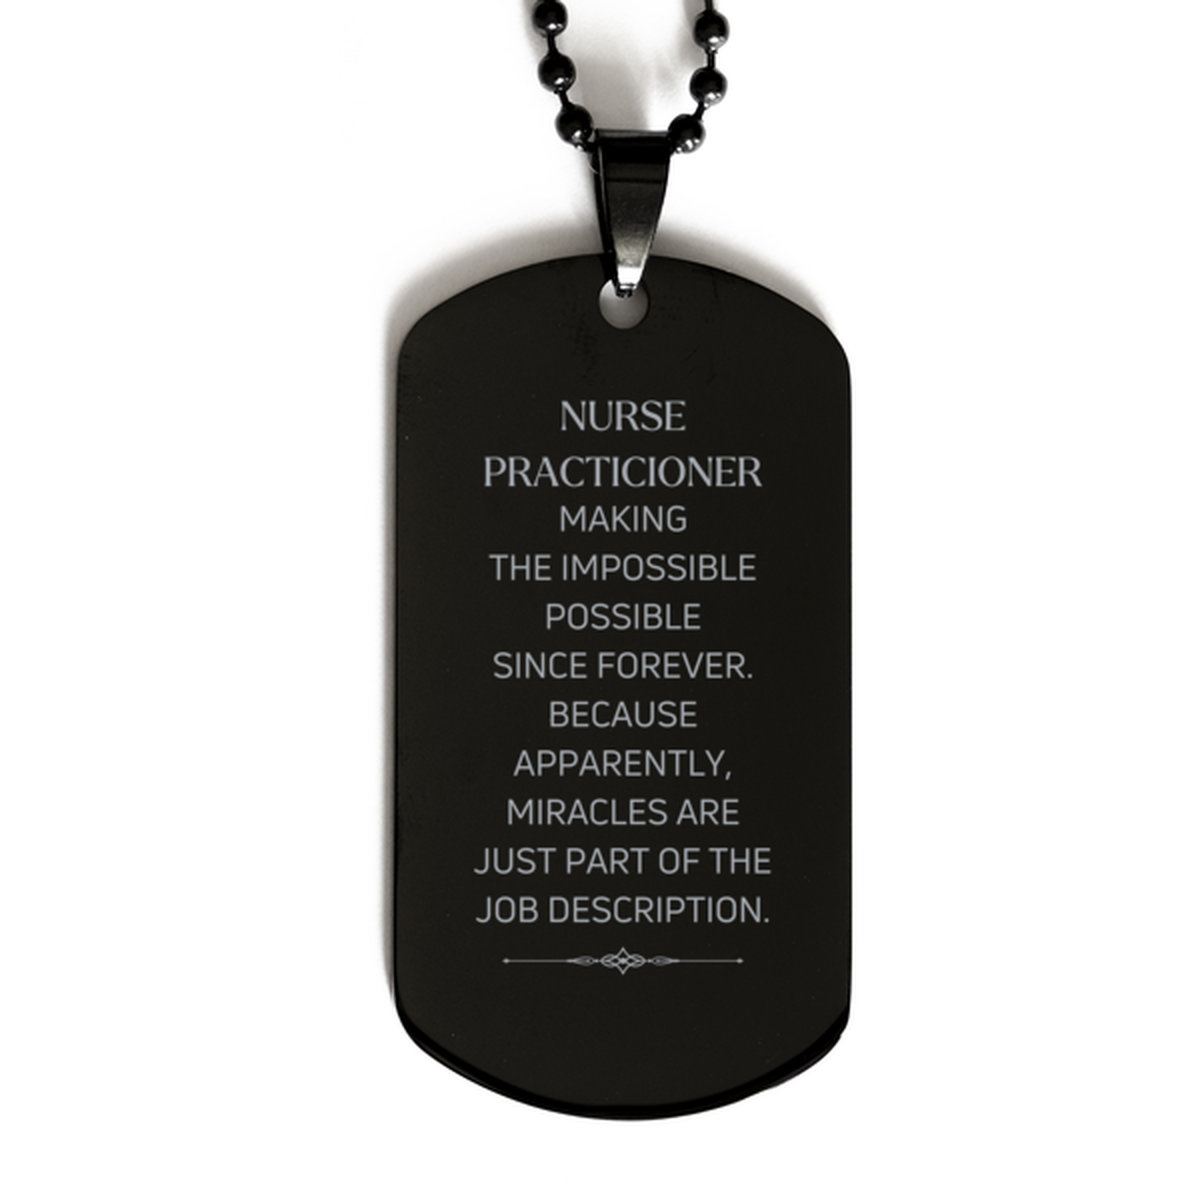 Funny Nurse Practicioner Gifts, Miracles are just part of the job description, Inspirational Birthday Black Dog Tag For Nurse Practicioner, Men, Women, Coworkers, Friends, Boss